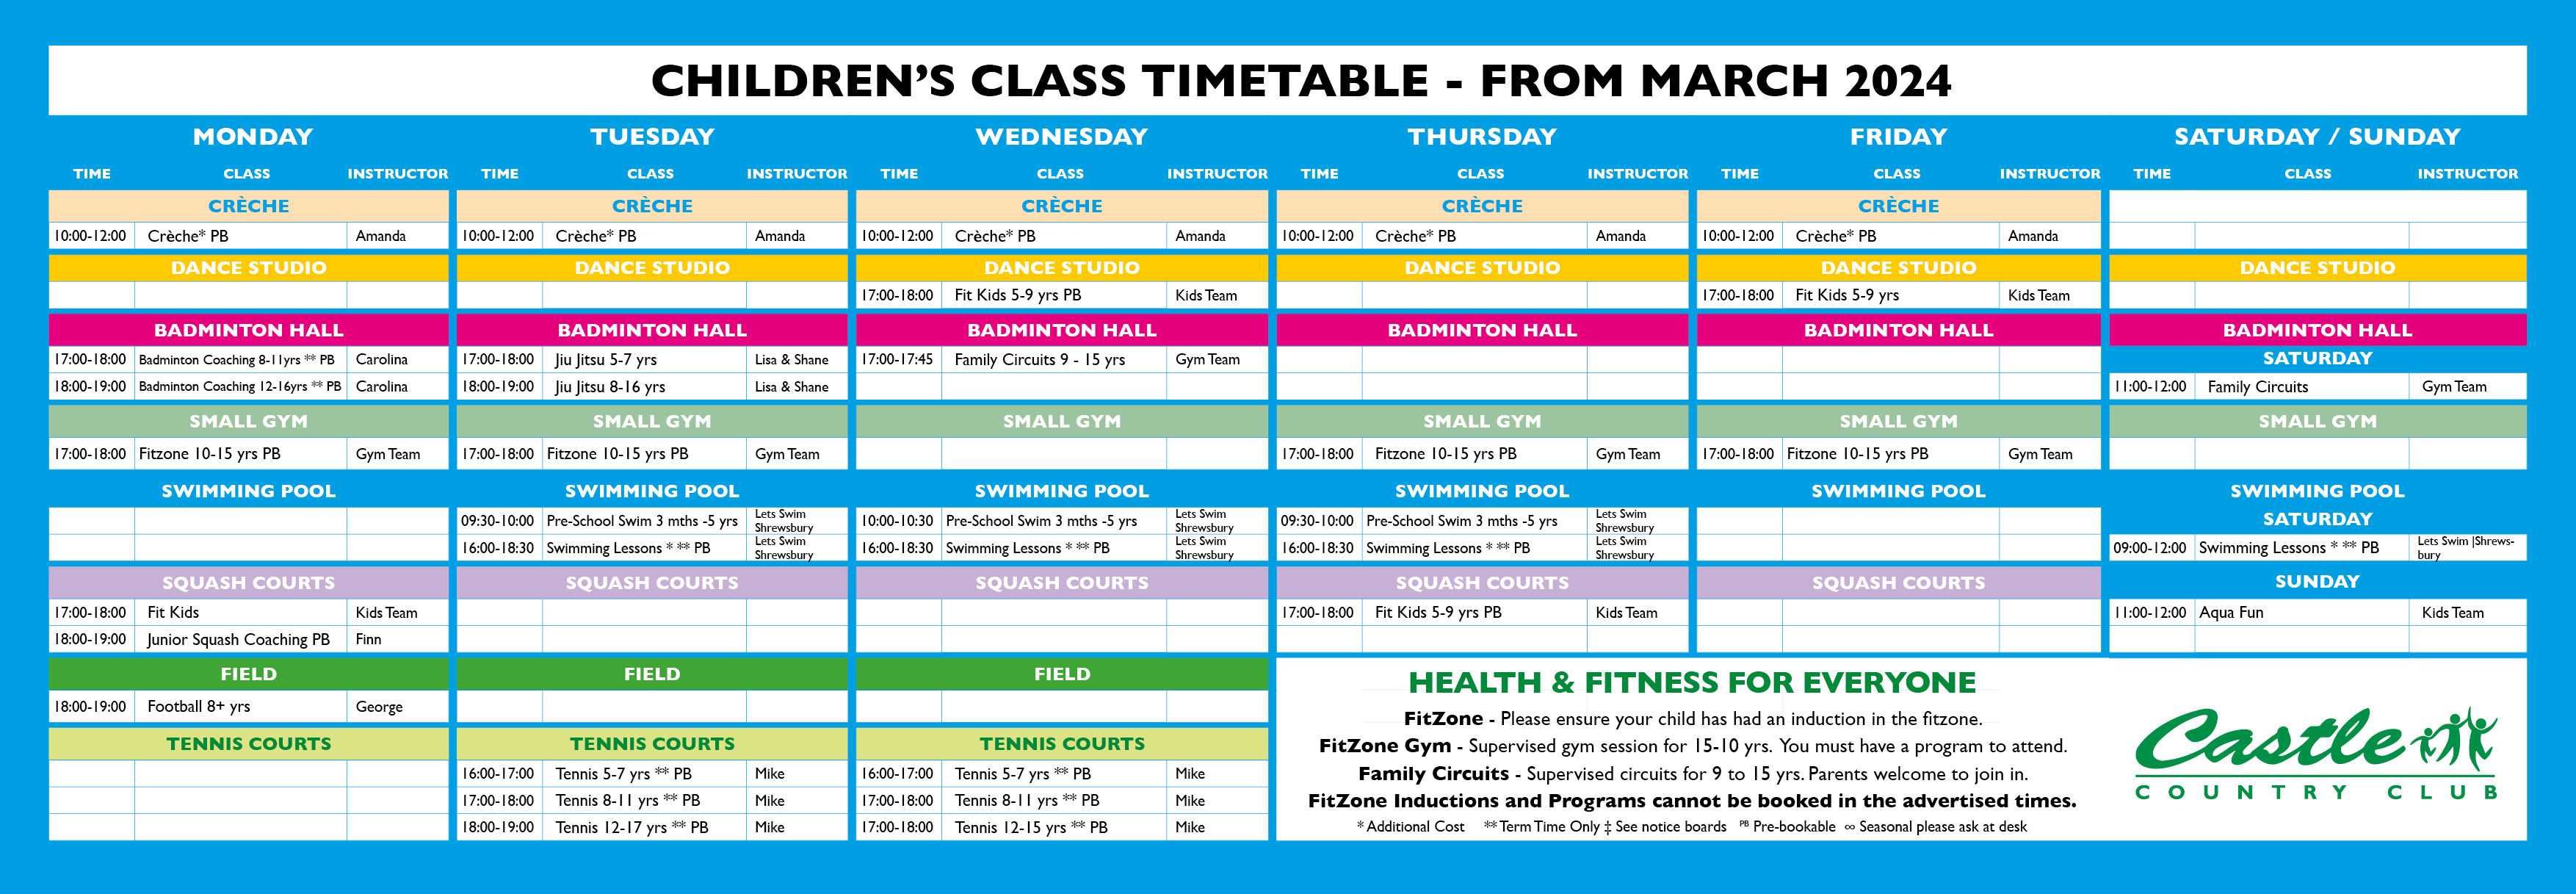 CCC Timetable KIDS March 2024